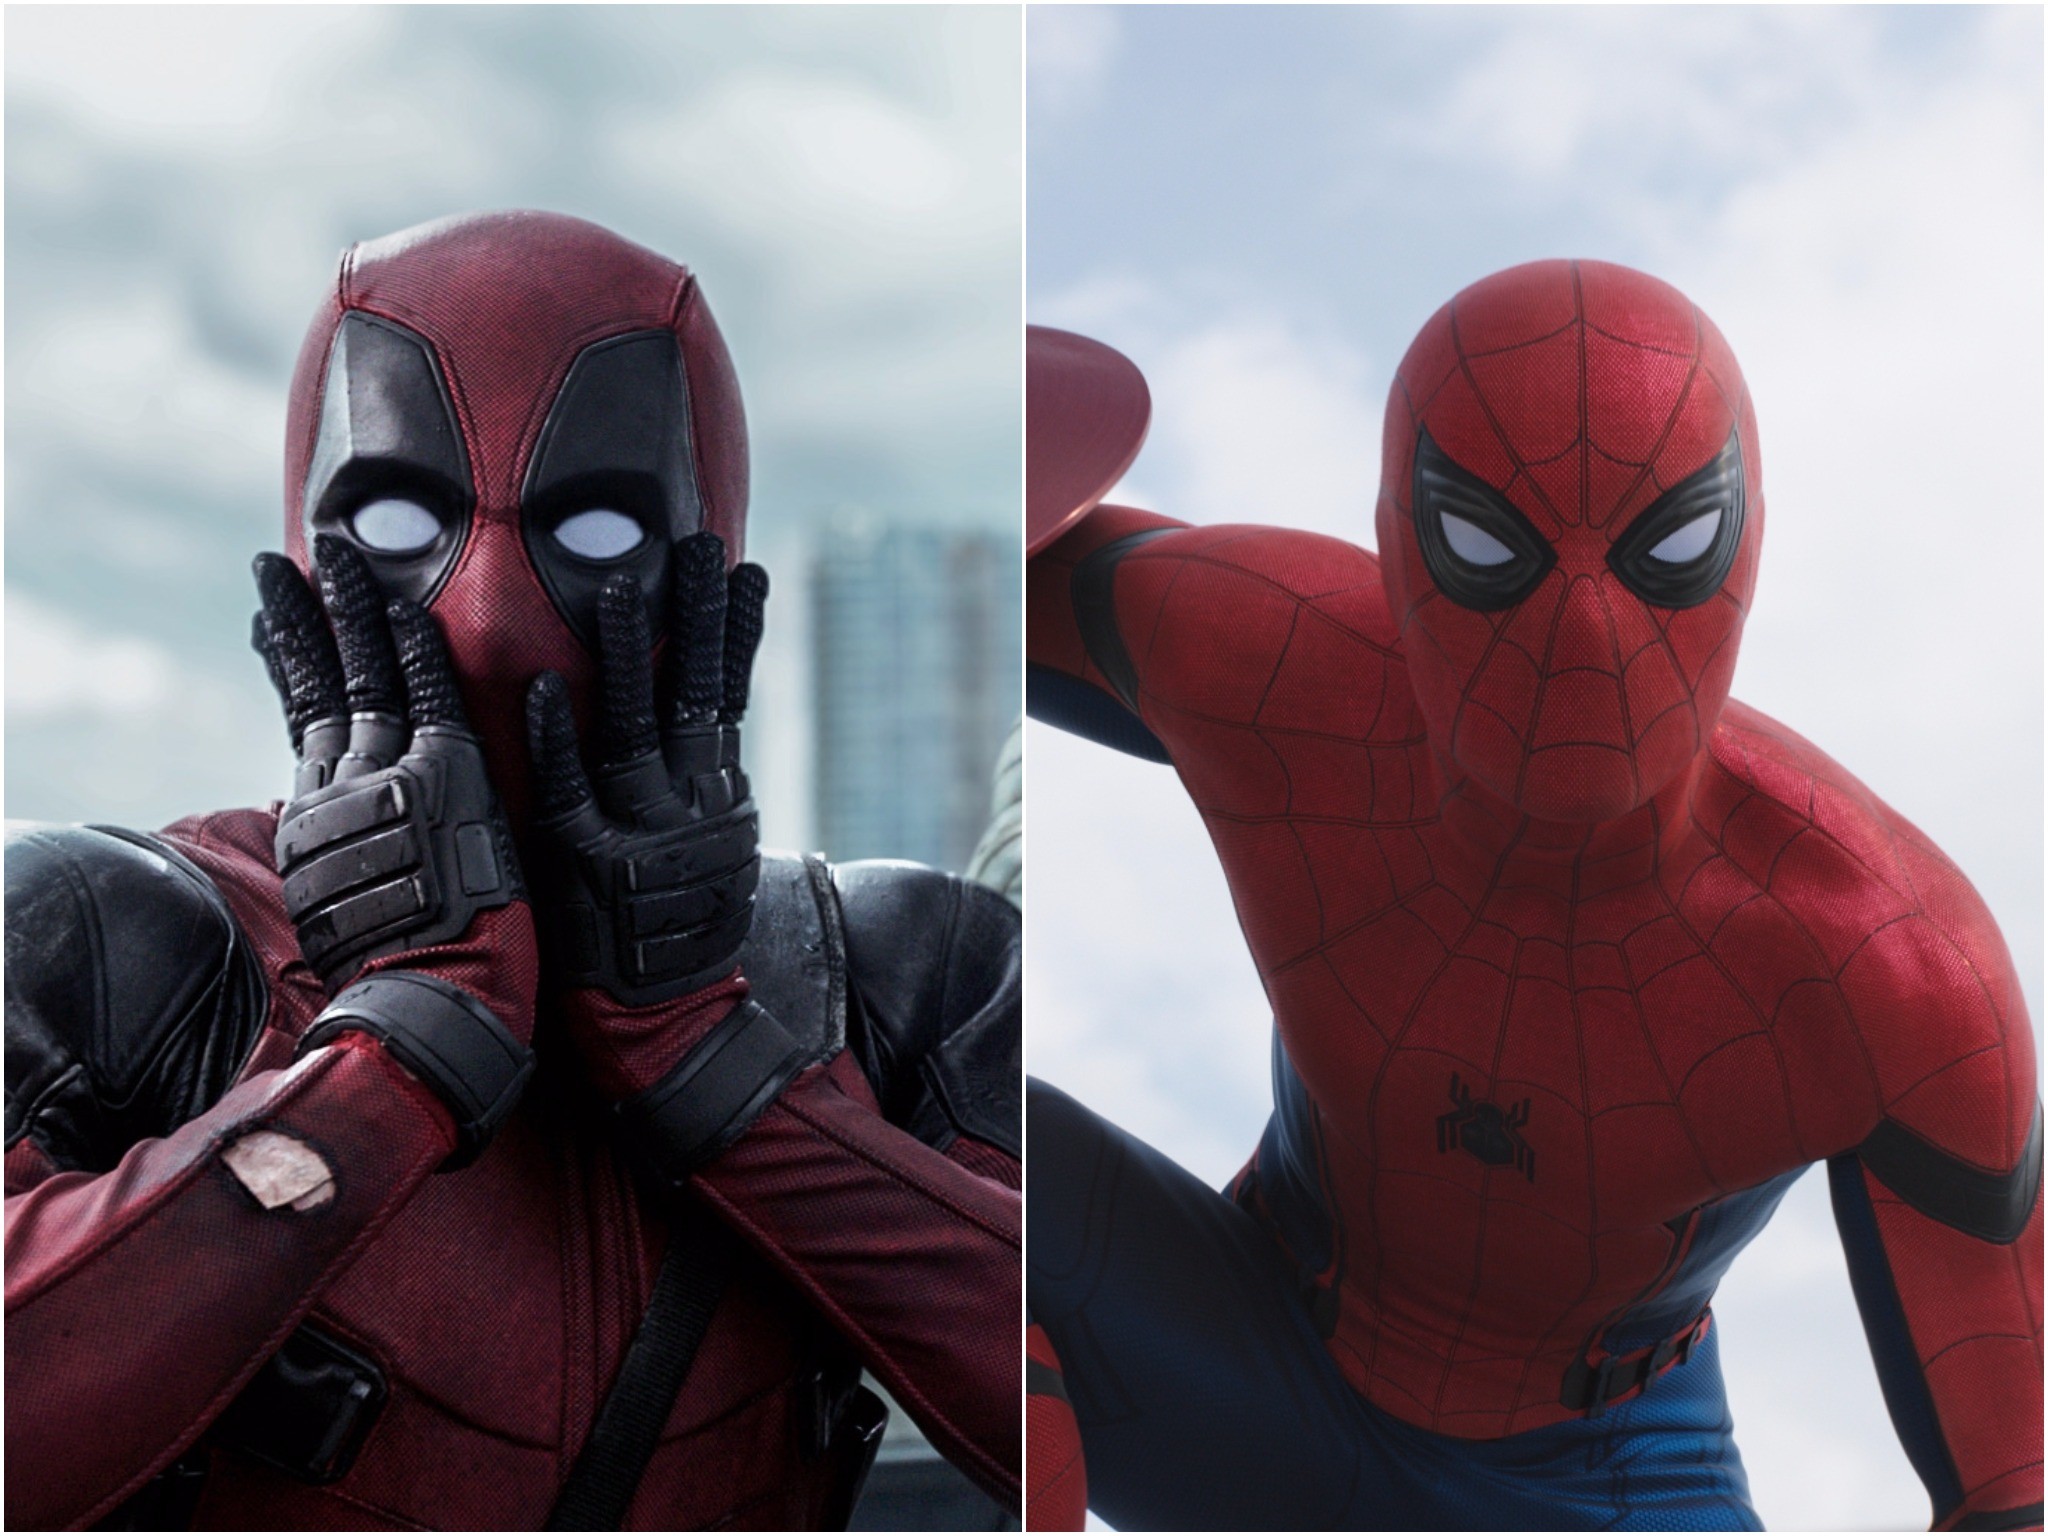 2048x1536 Deadpool/Spider-Man crossover: Director Tim Miller pushing for Marvel  superheroes to meet on screen | The Independent